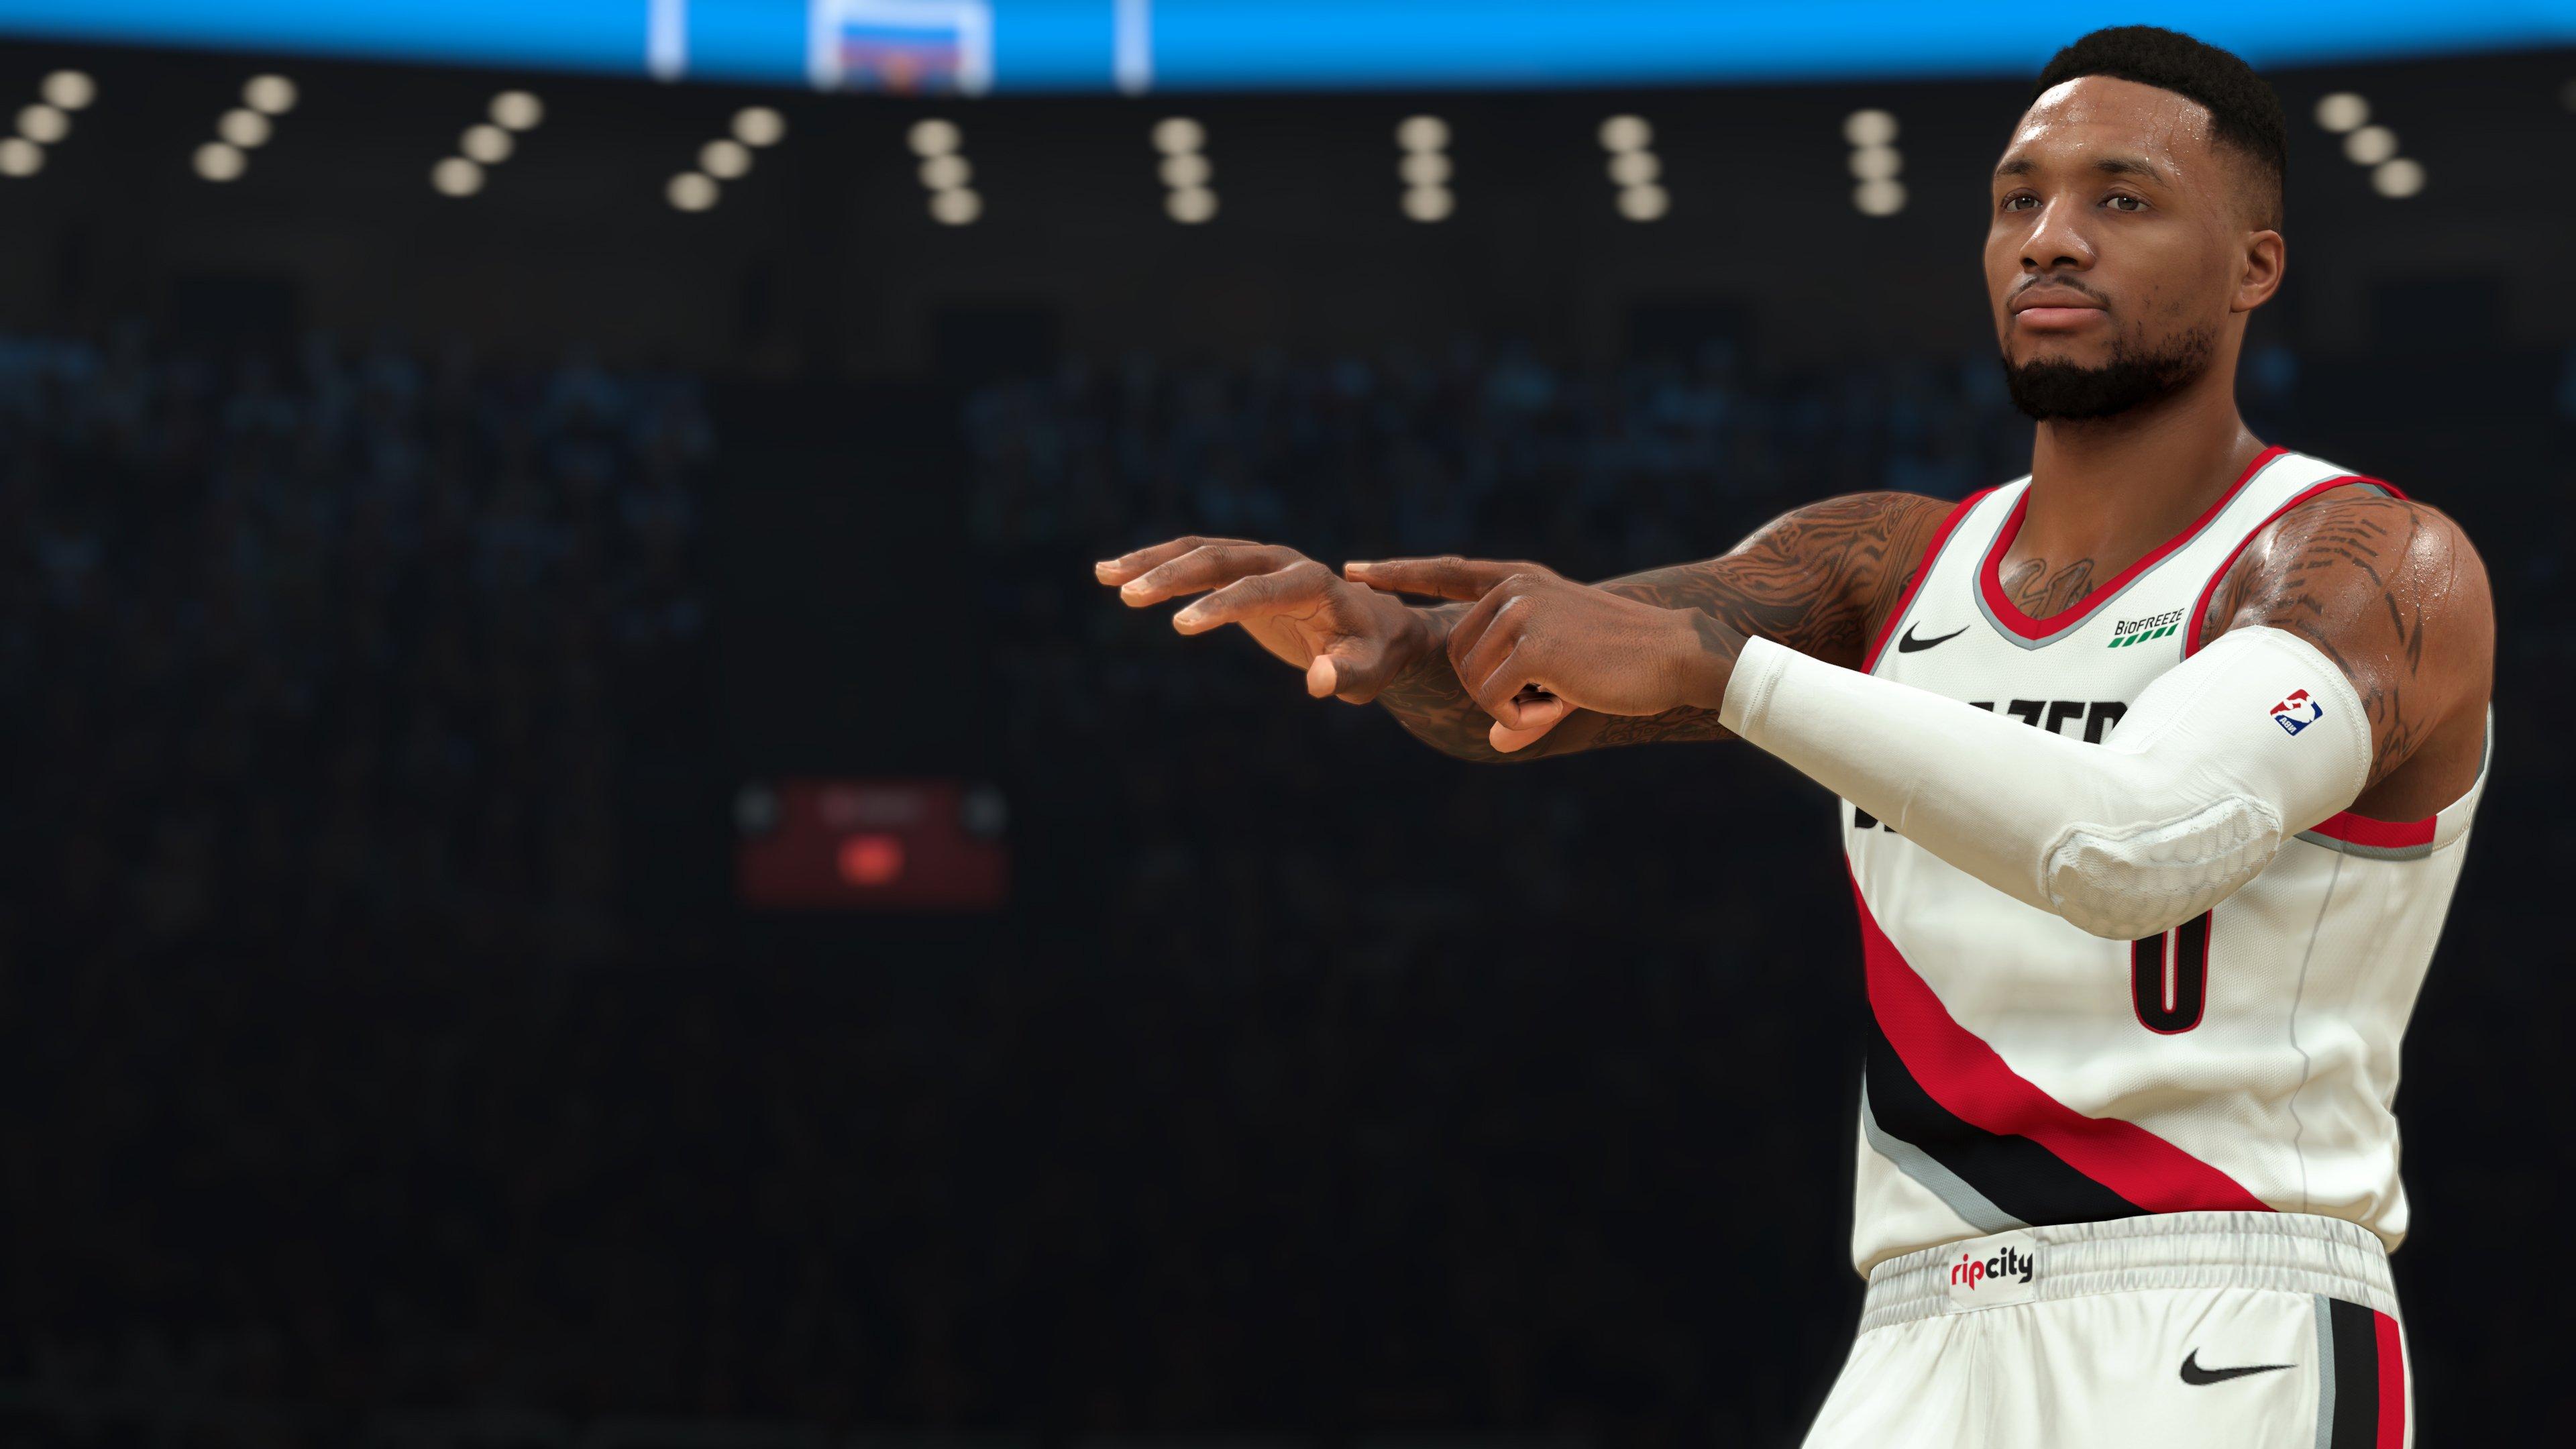 NBA 2K21 - All Team Jerseys/Uniforms In The Game 